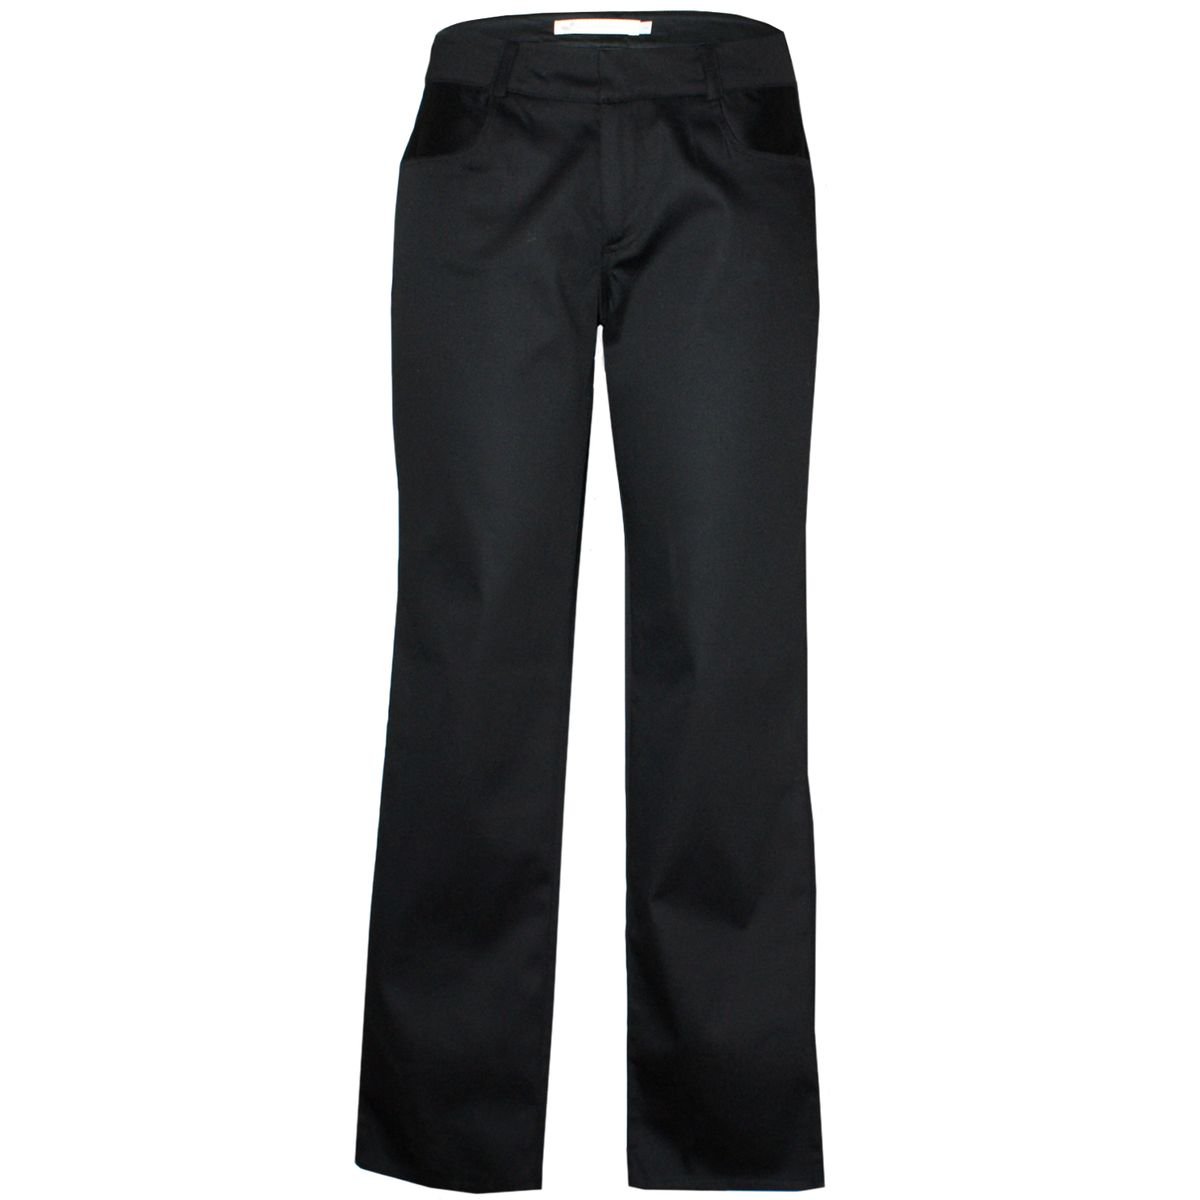 Nucleus Stretch Cotton Black Chino Pants | Shop Today. Get it Tomorrow ...